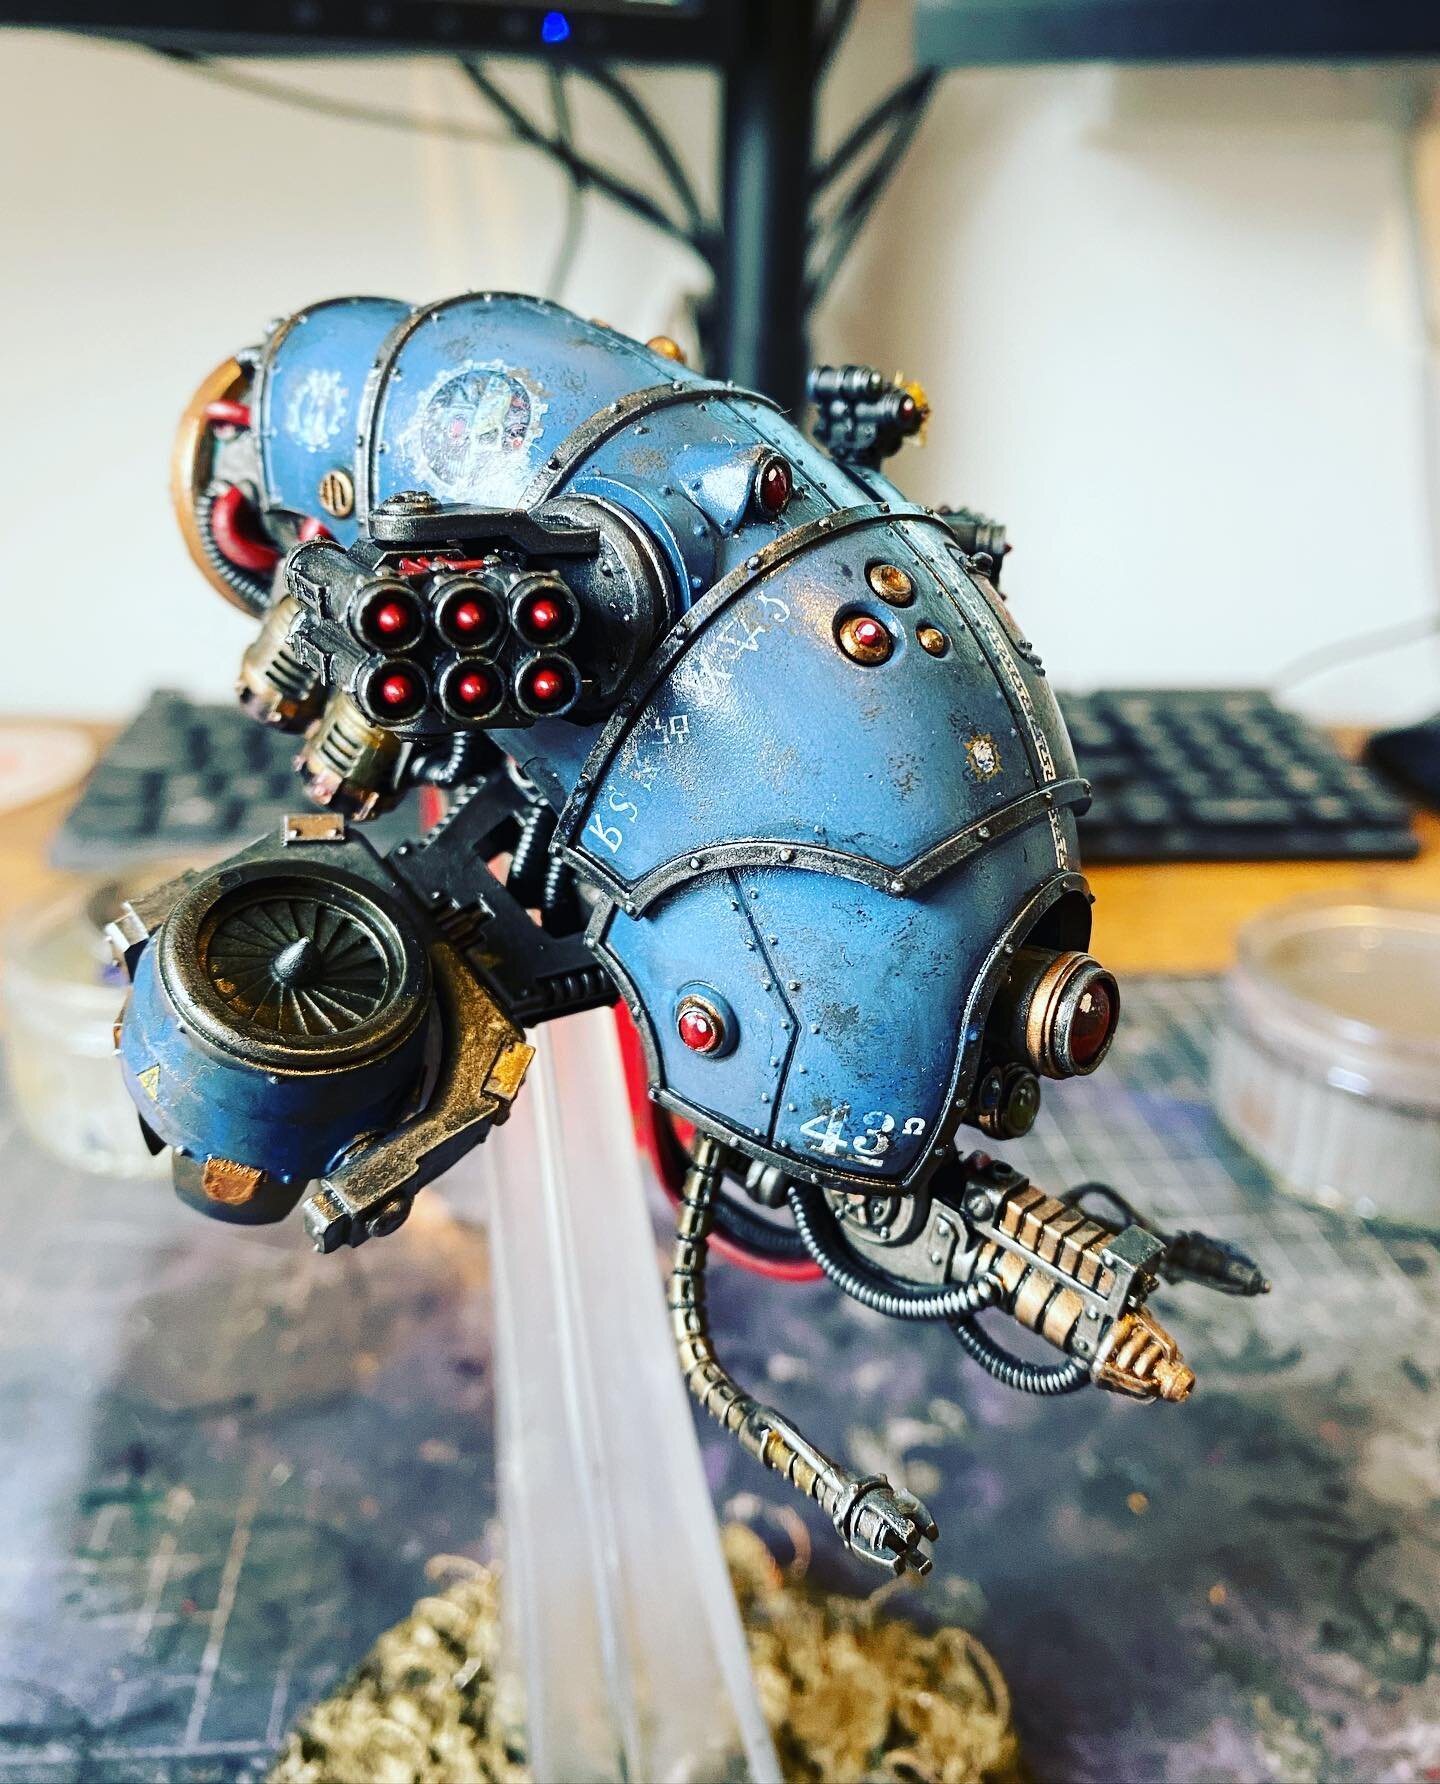 Not dead, just crazy busy! With less than a week to go for @heresy.scot time to get this eBay rescue #vulturax battle ready! Not played my #mechanicum at an even this edition, and won&rsquo;t get to until FW release rules for the new edition.

Back t